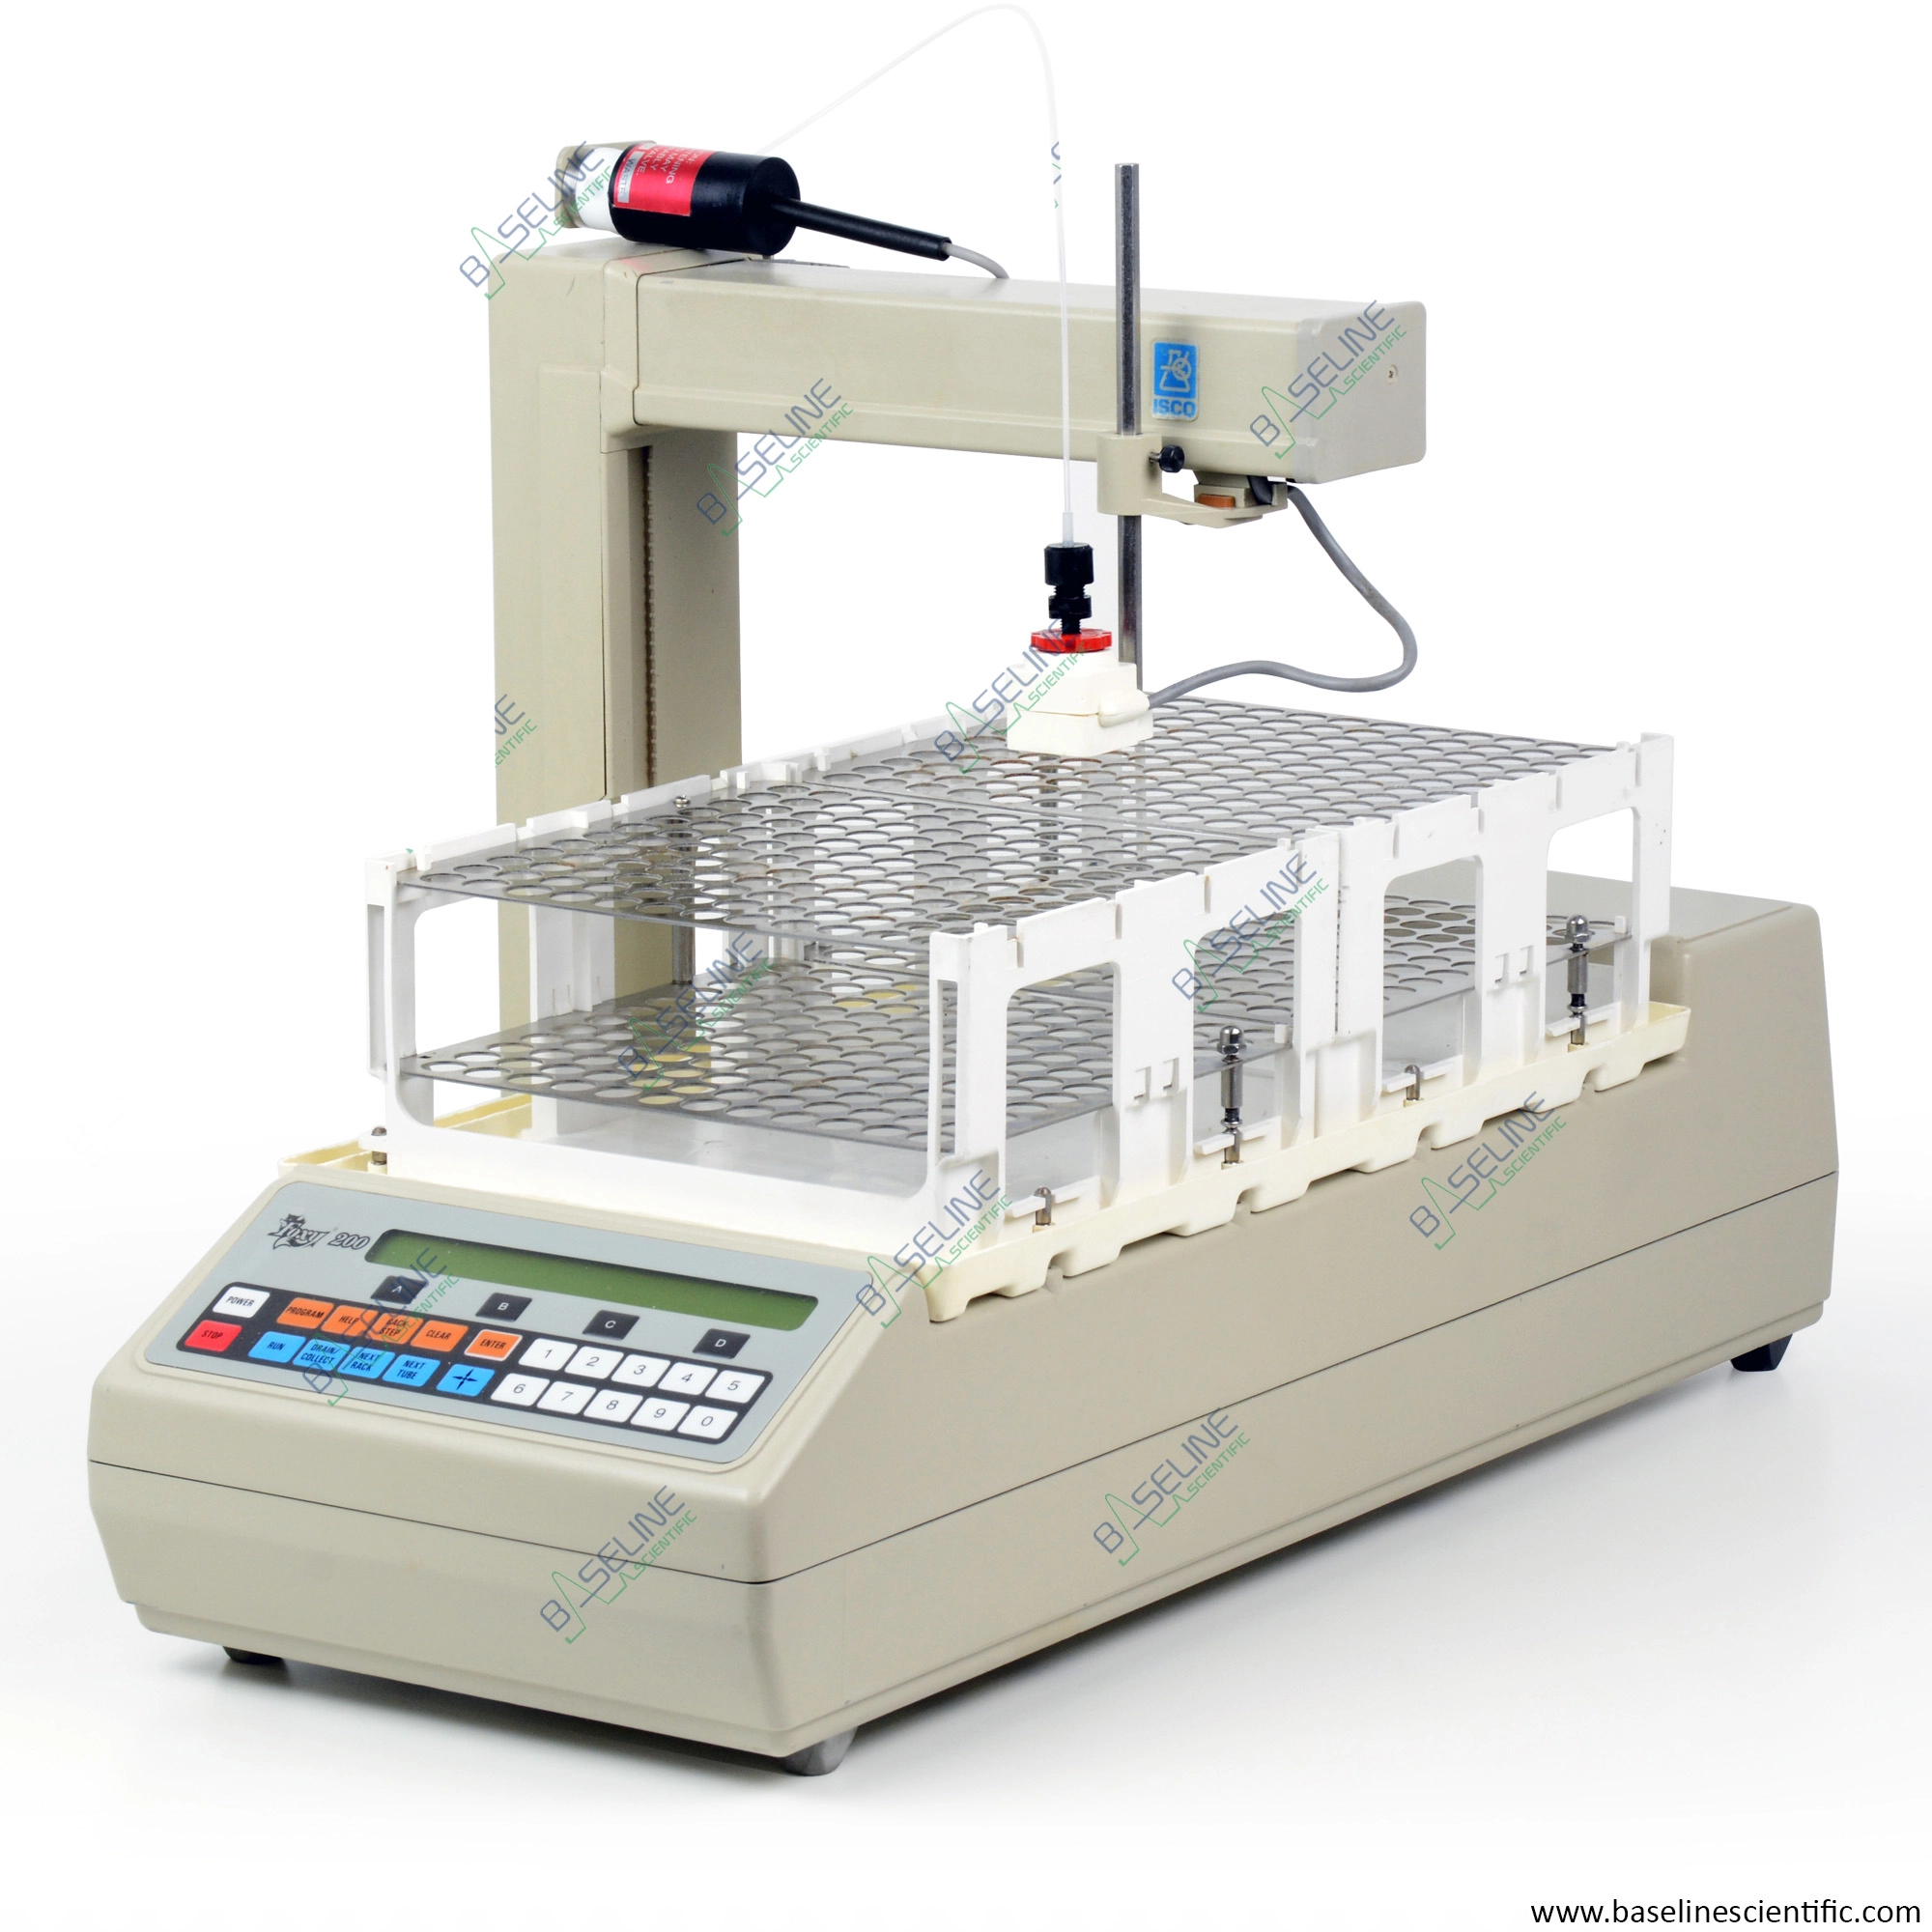 Varian Prostar 701 / Foxy 200 X-Y Fraction Collector